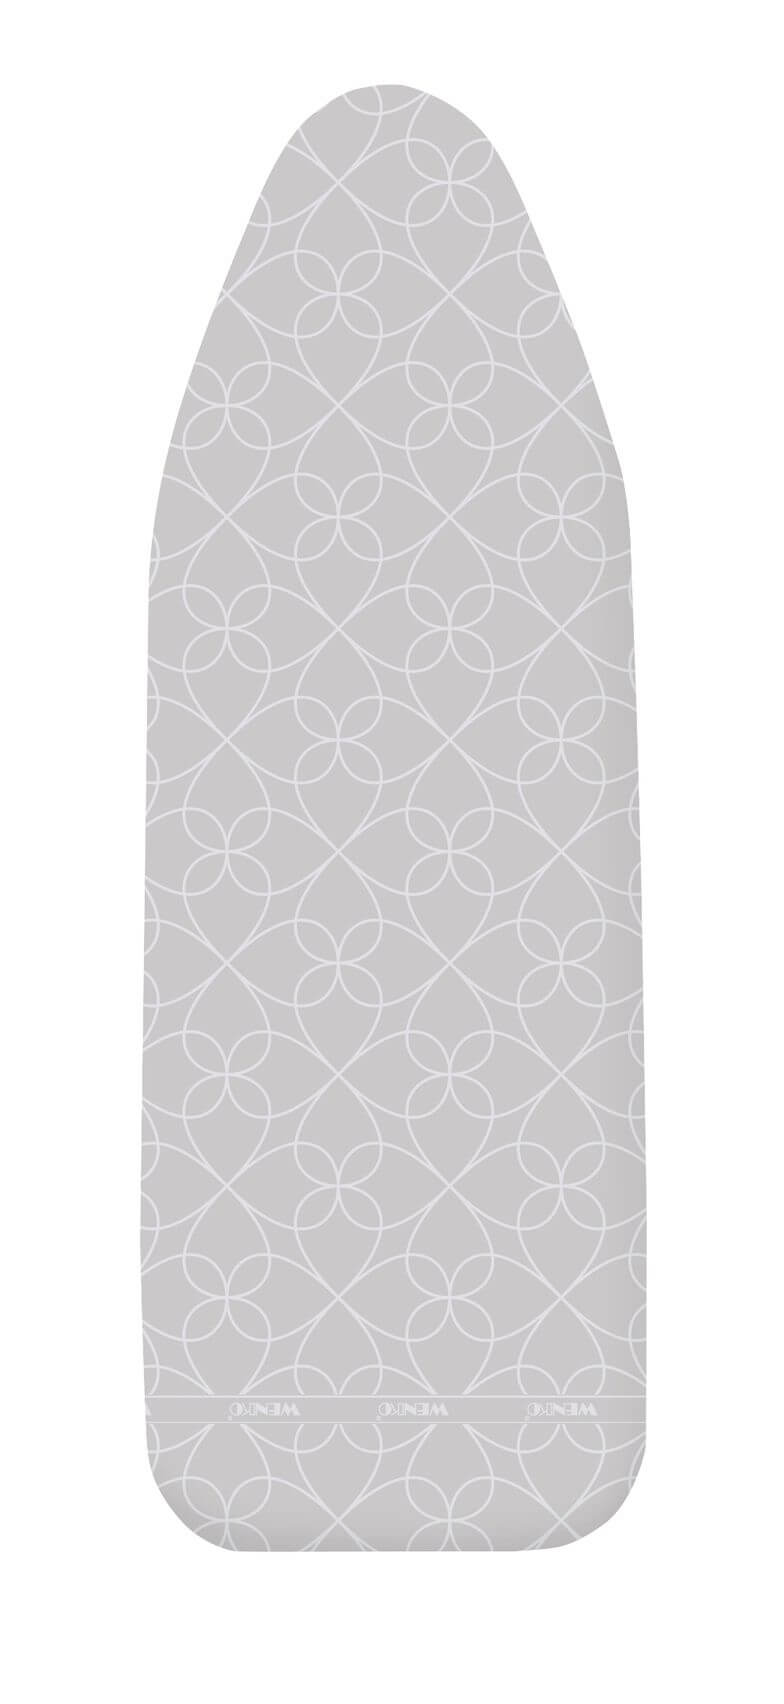 Alu Heat Reflective Ironing Board Cover Medium-Large - LAUNDRY - Ironing Board Covers - Soko and Co